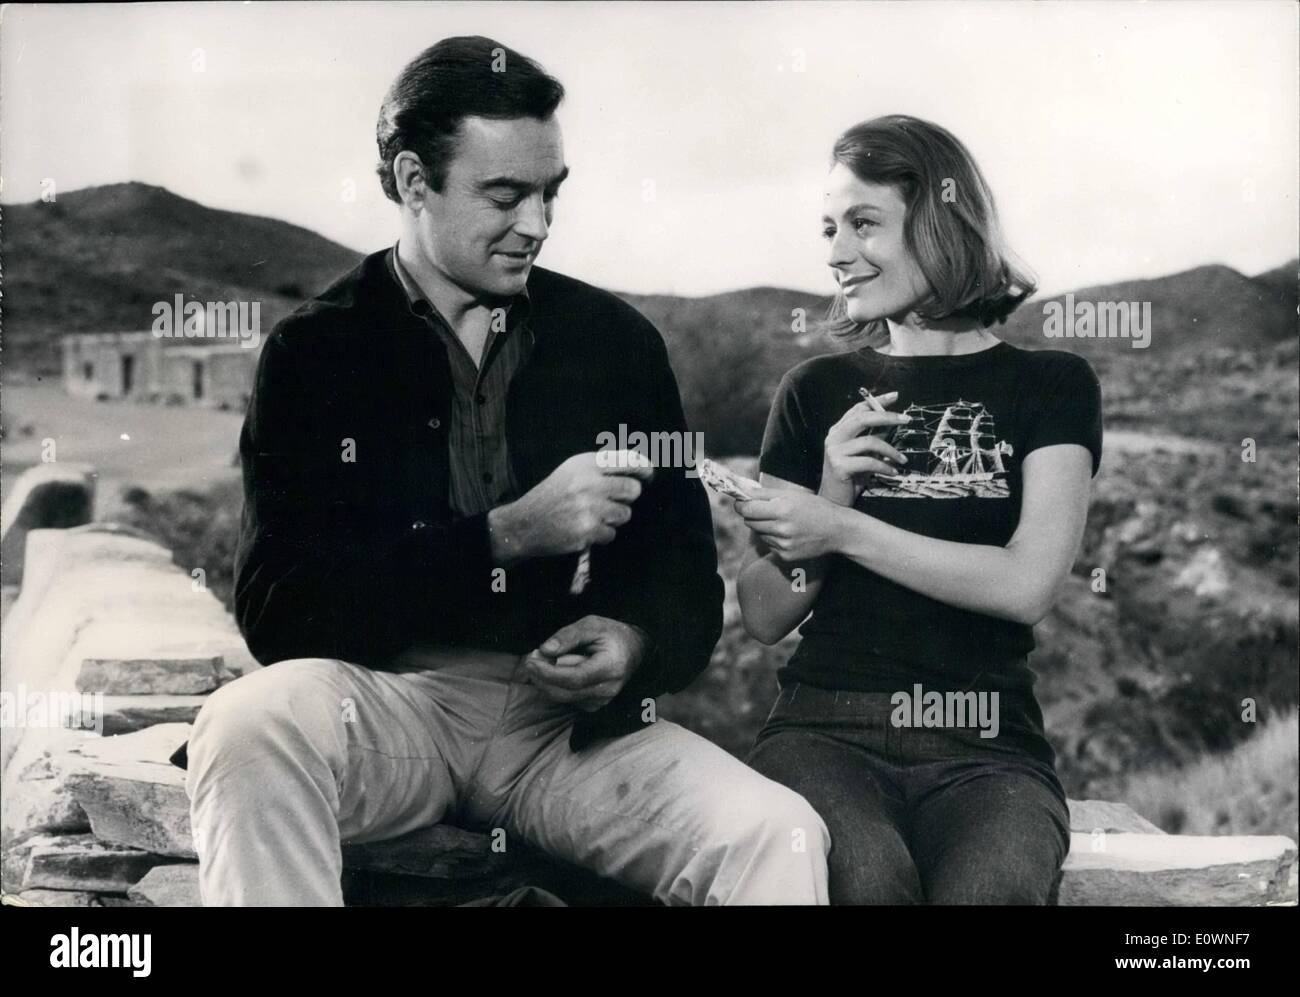 Dec. 12, 1963 - Richard Johnson and Annie Girardot Shooting together in Spain.:French film-director woman's'', adapted from a novel by Maria Luisa Linares, in Spain and in which British actor Richard Johnson and France's Annie Girardot will co-star. Photo shows Richard Johnson and Annie Girardot in a scene of the other woman' Stock Photo